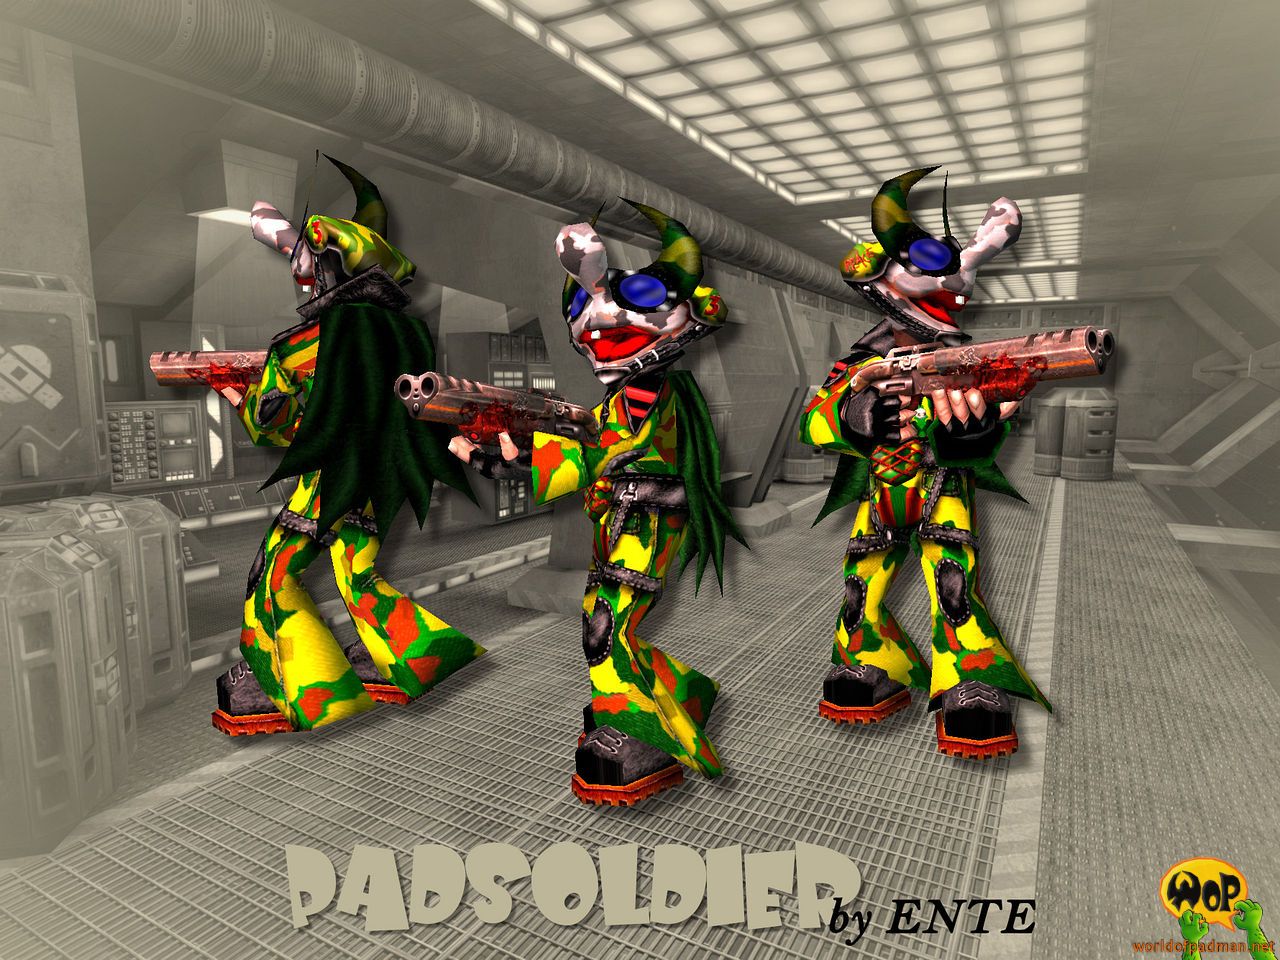 PadSoldier for Quake 3 Arena